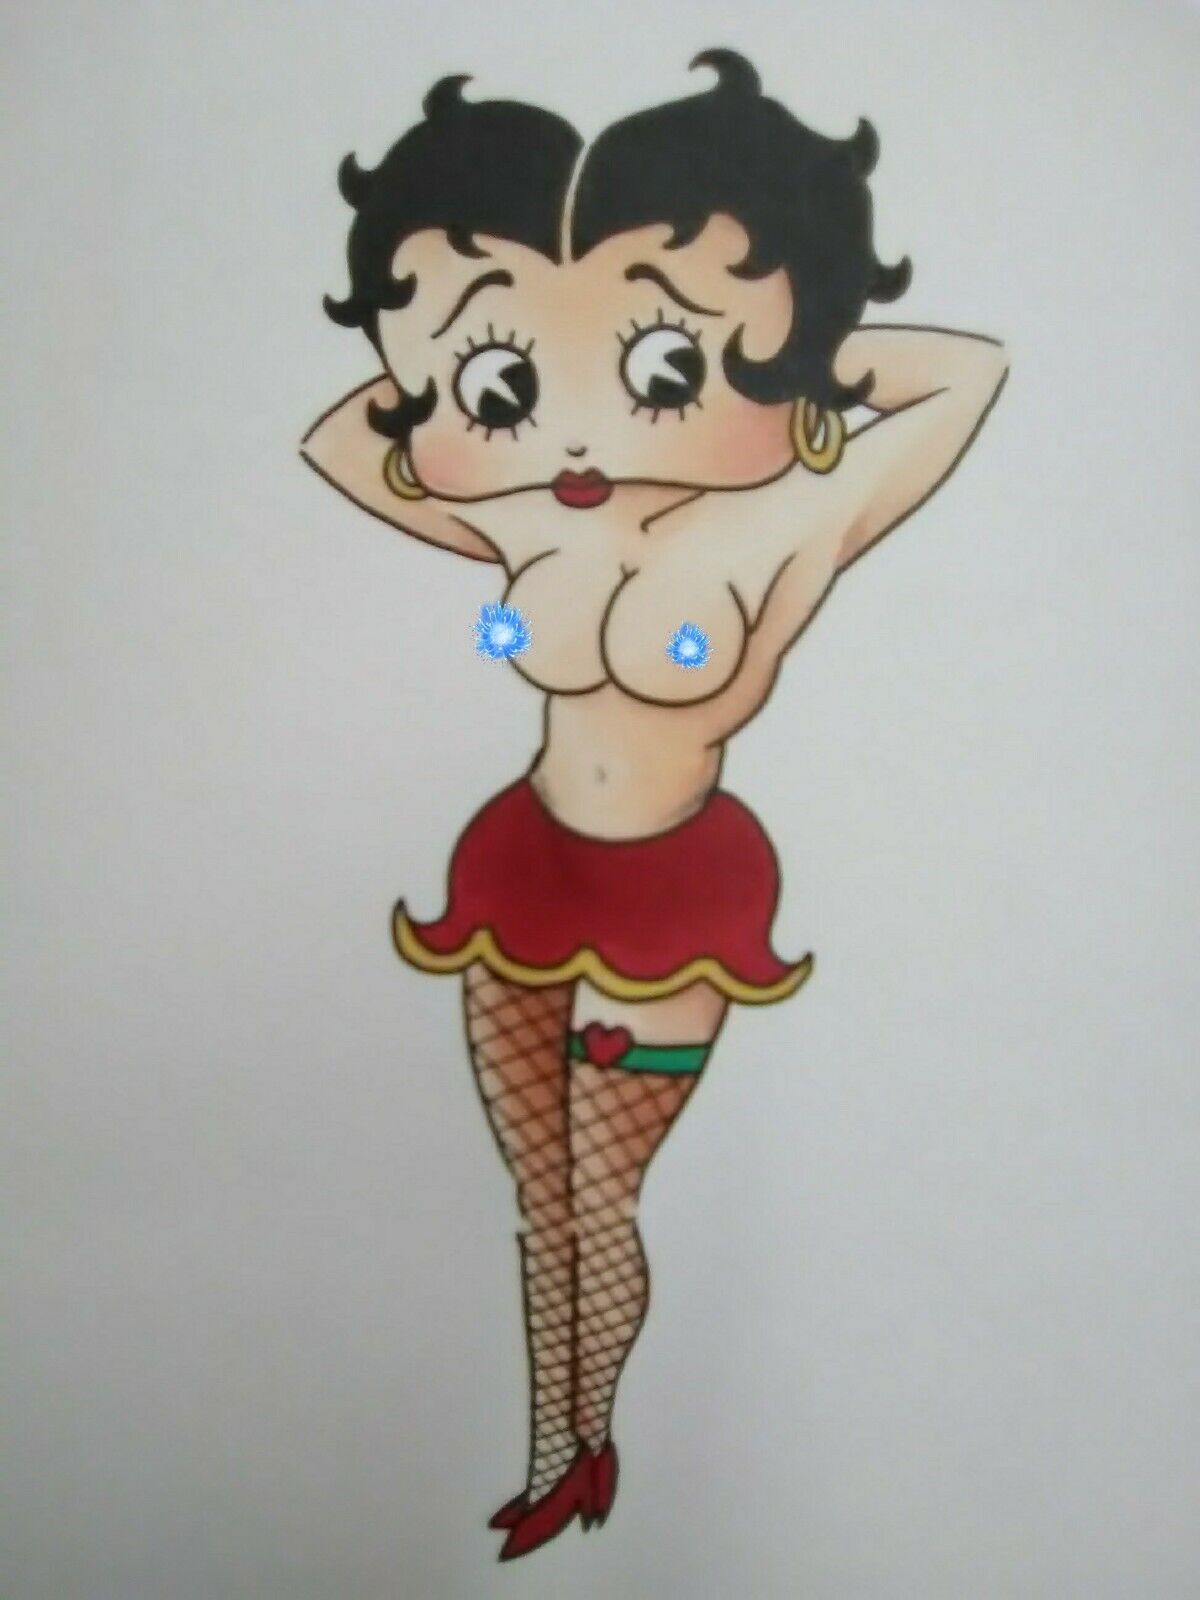 Betty Boop Print 8.5x11" Color Art Sketch Card Drawing Comic Parrish Woman Pinup